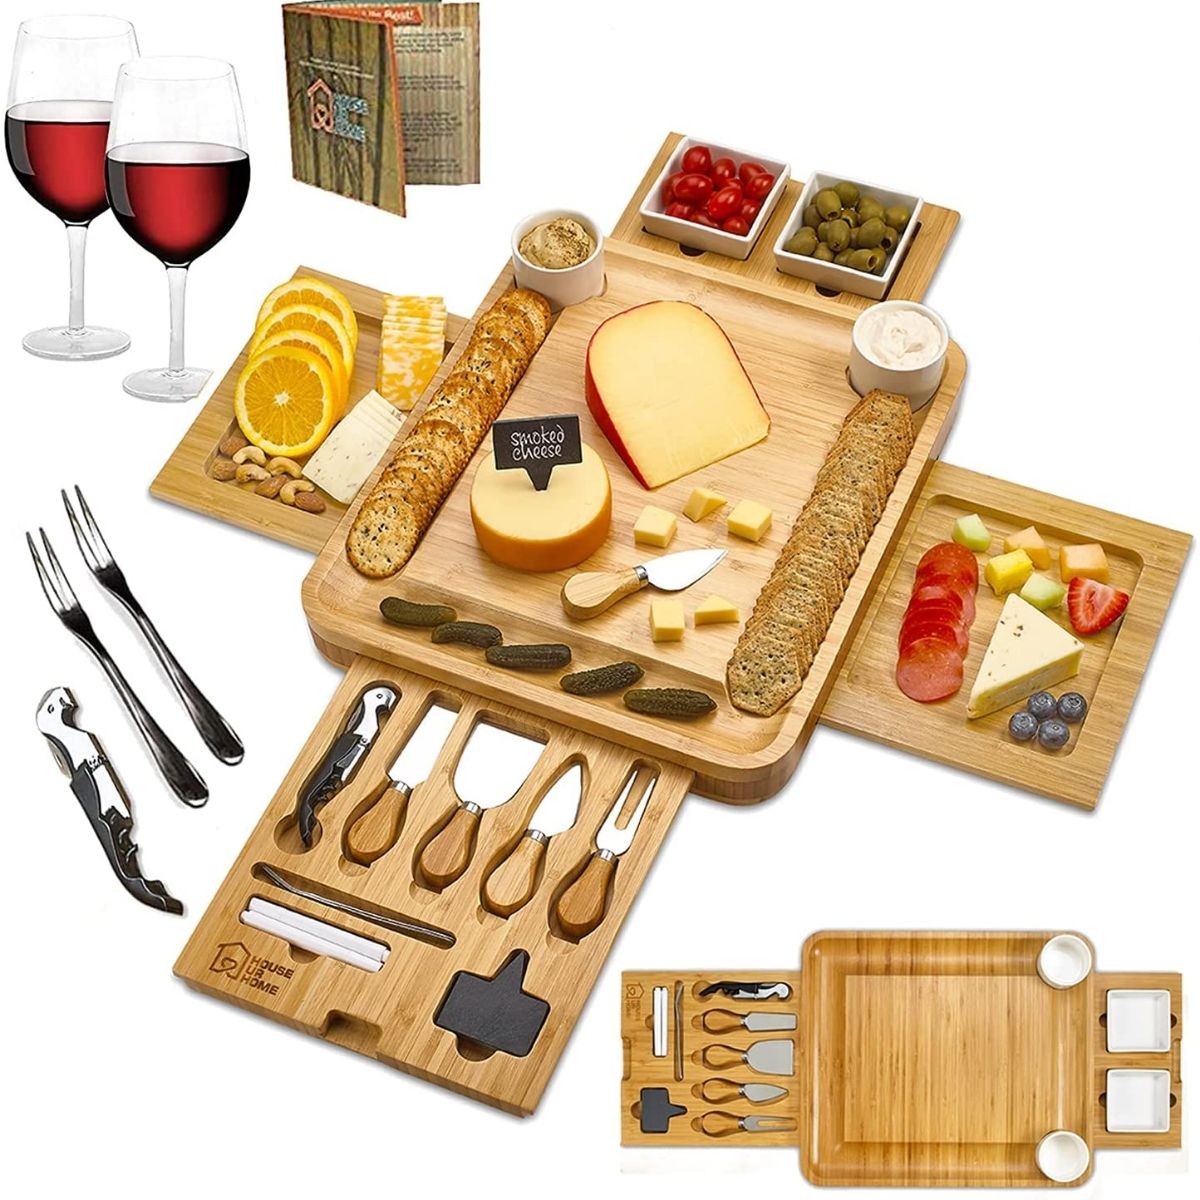 The Best Gifts for Wine Lovers Option: Cheese Board 2 Ceramic Bowls 2 Serving Plates